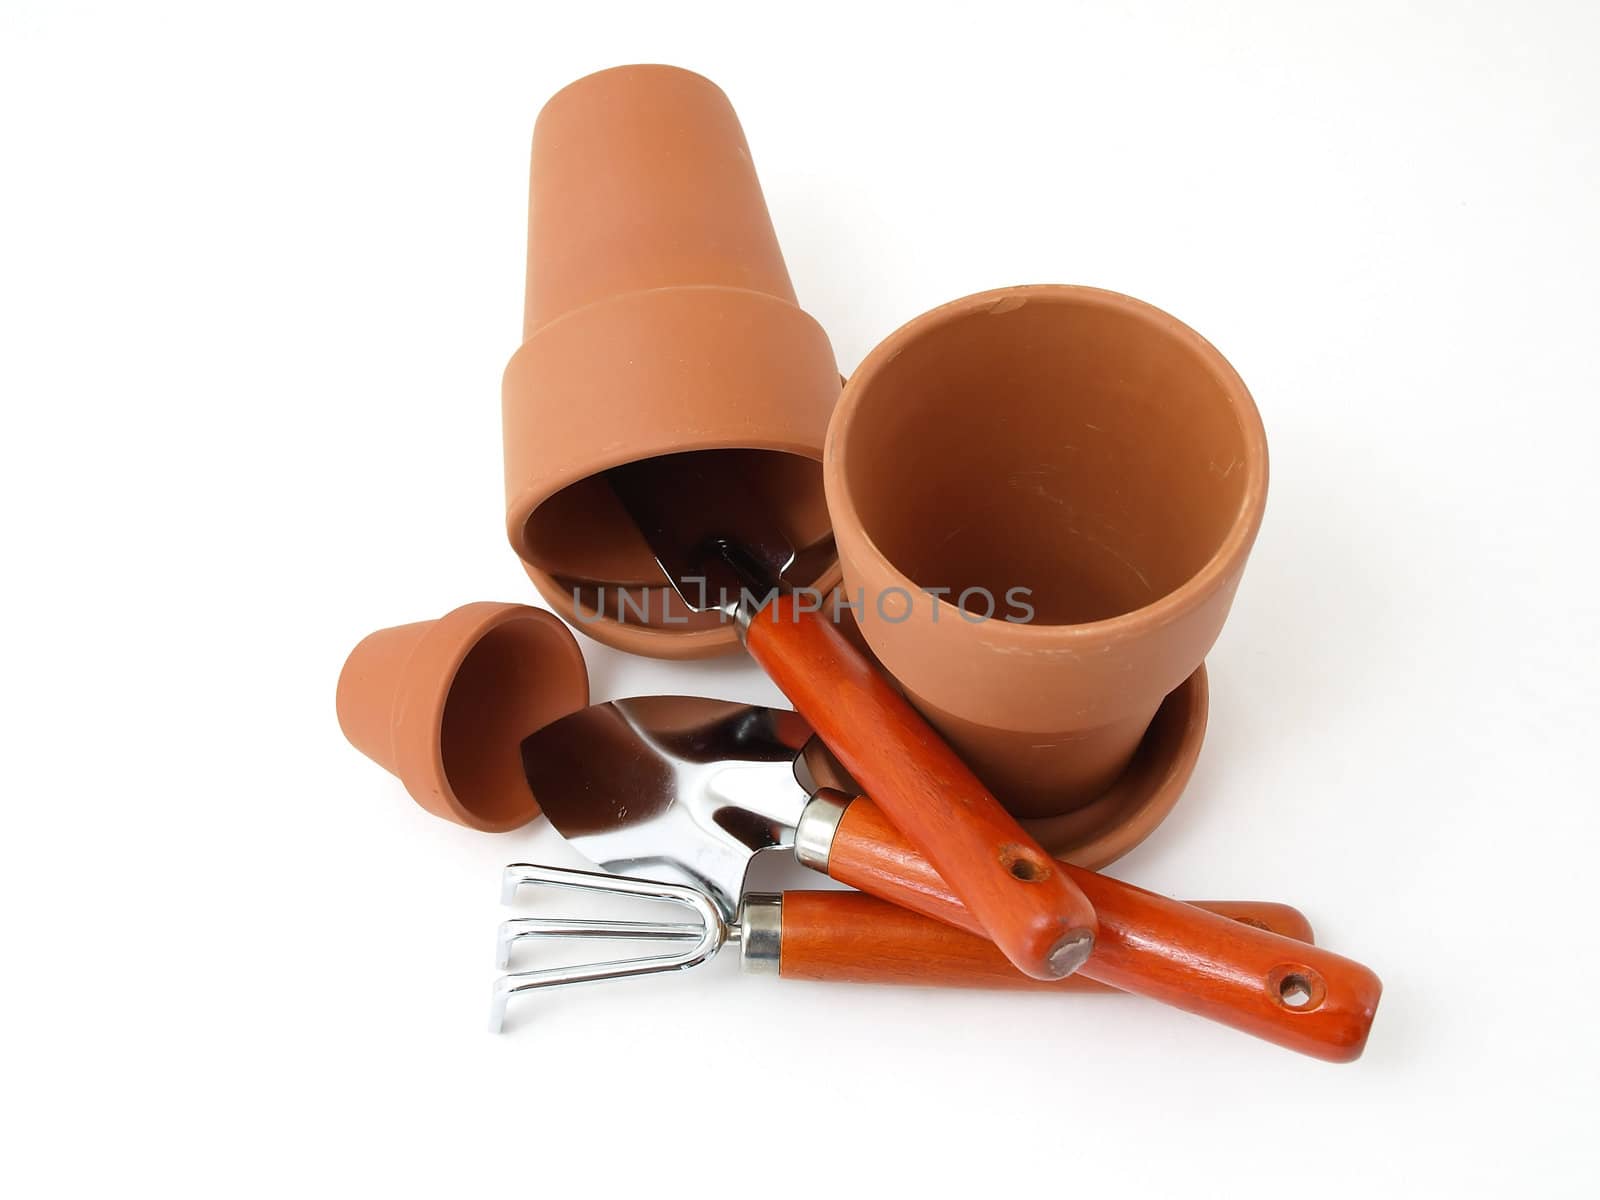 Tools and Starter Pots by RGebbiePhoto